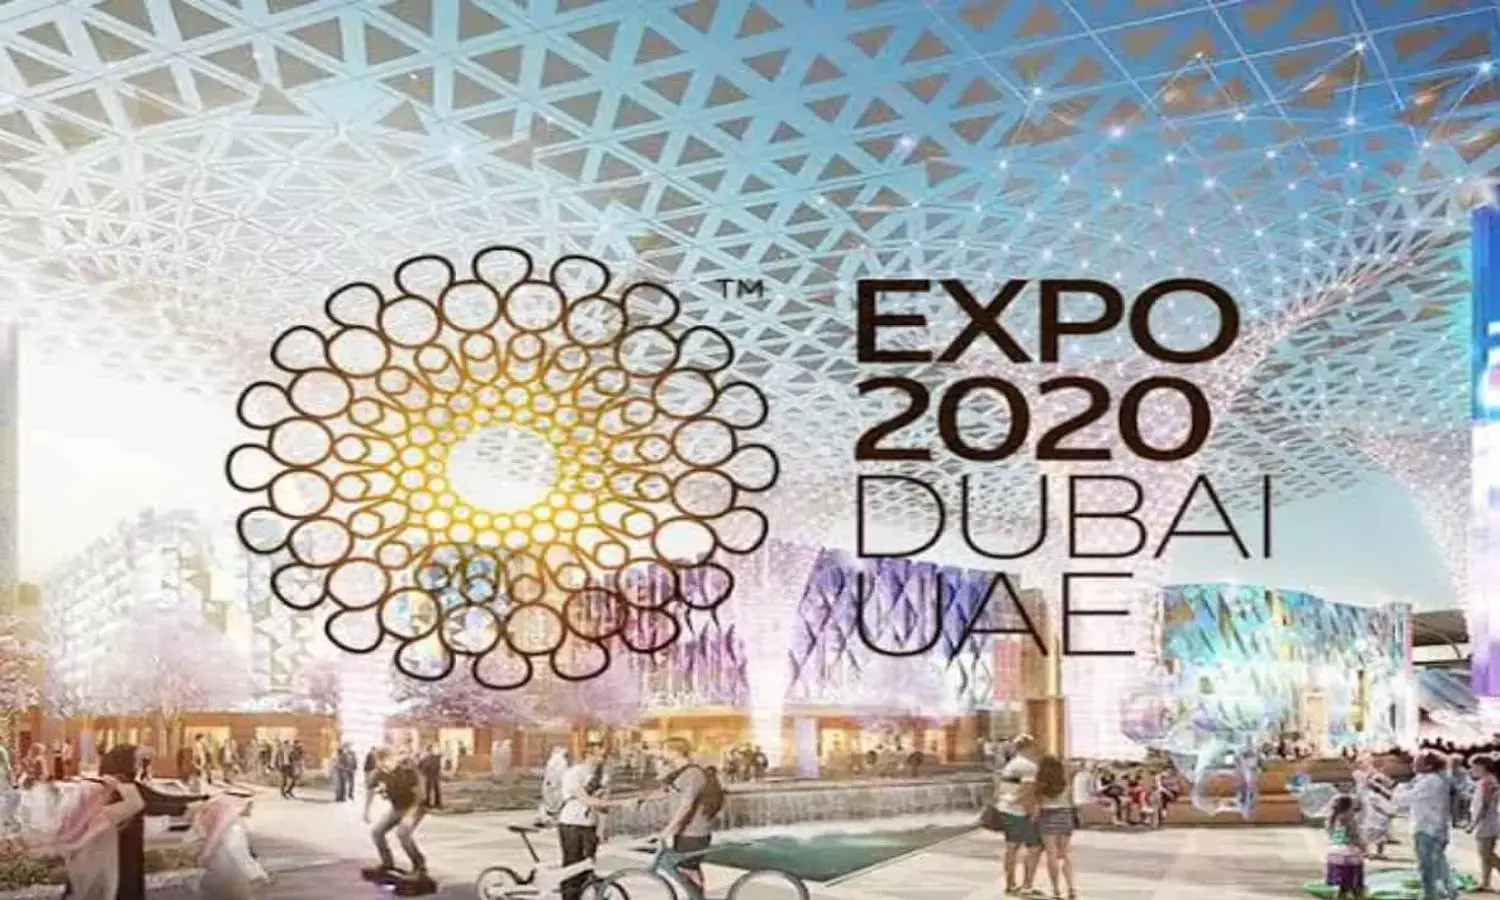 Read all Latest Updates on and about Expo 2020 Dubai